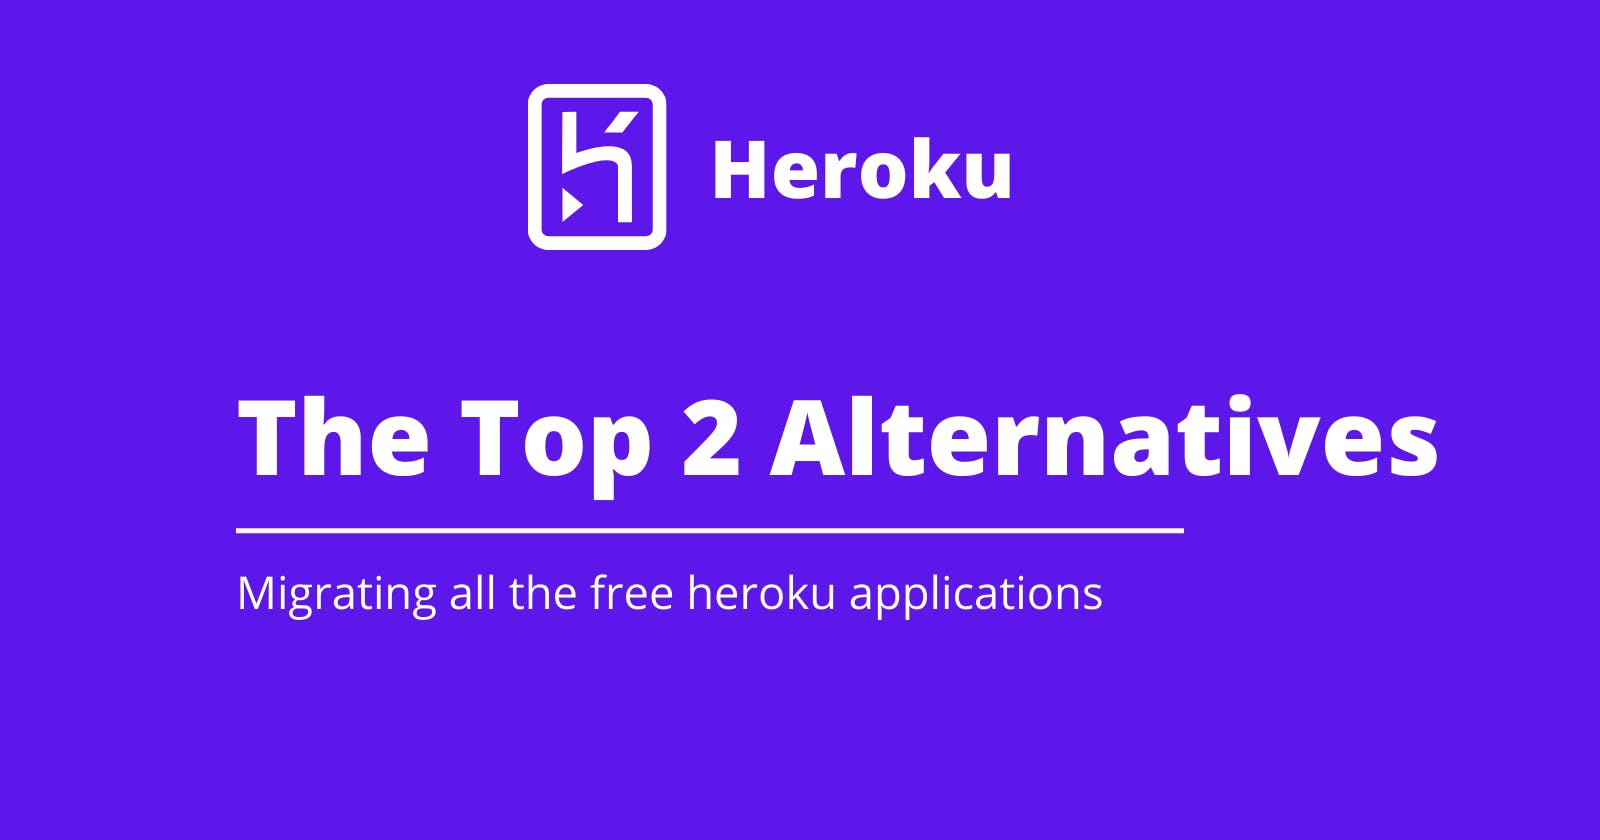 Heroku is shutting down all the free services  and here are top 2 alternatives